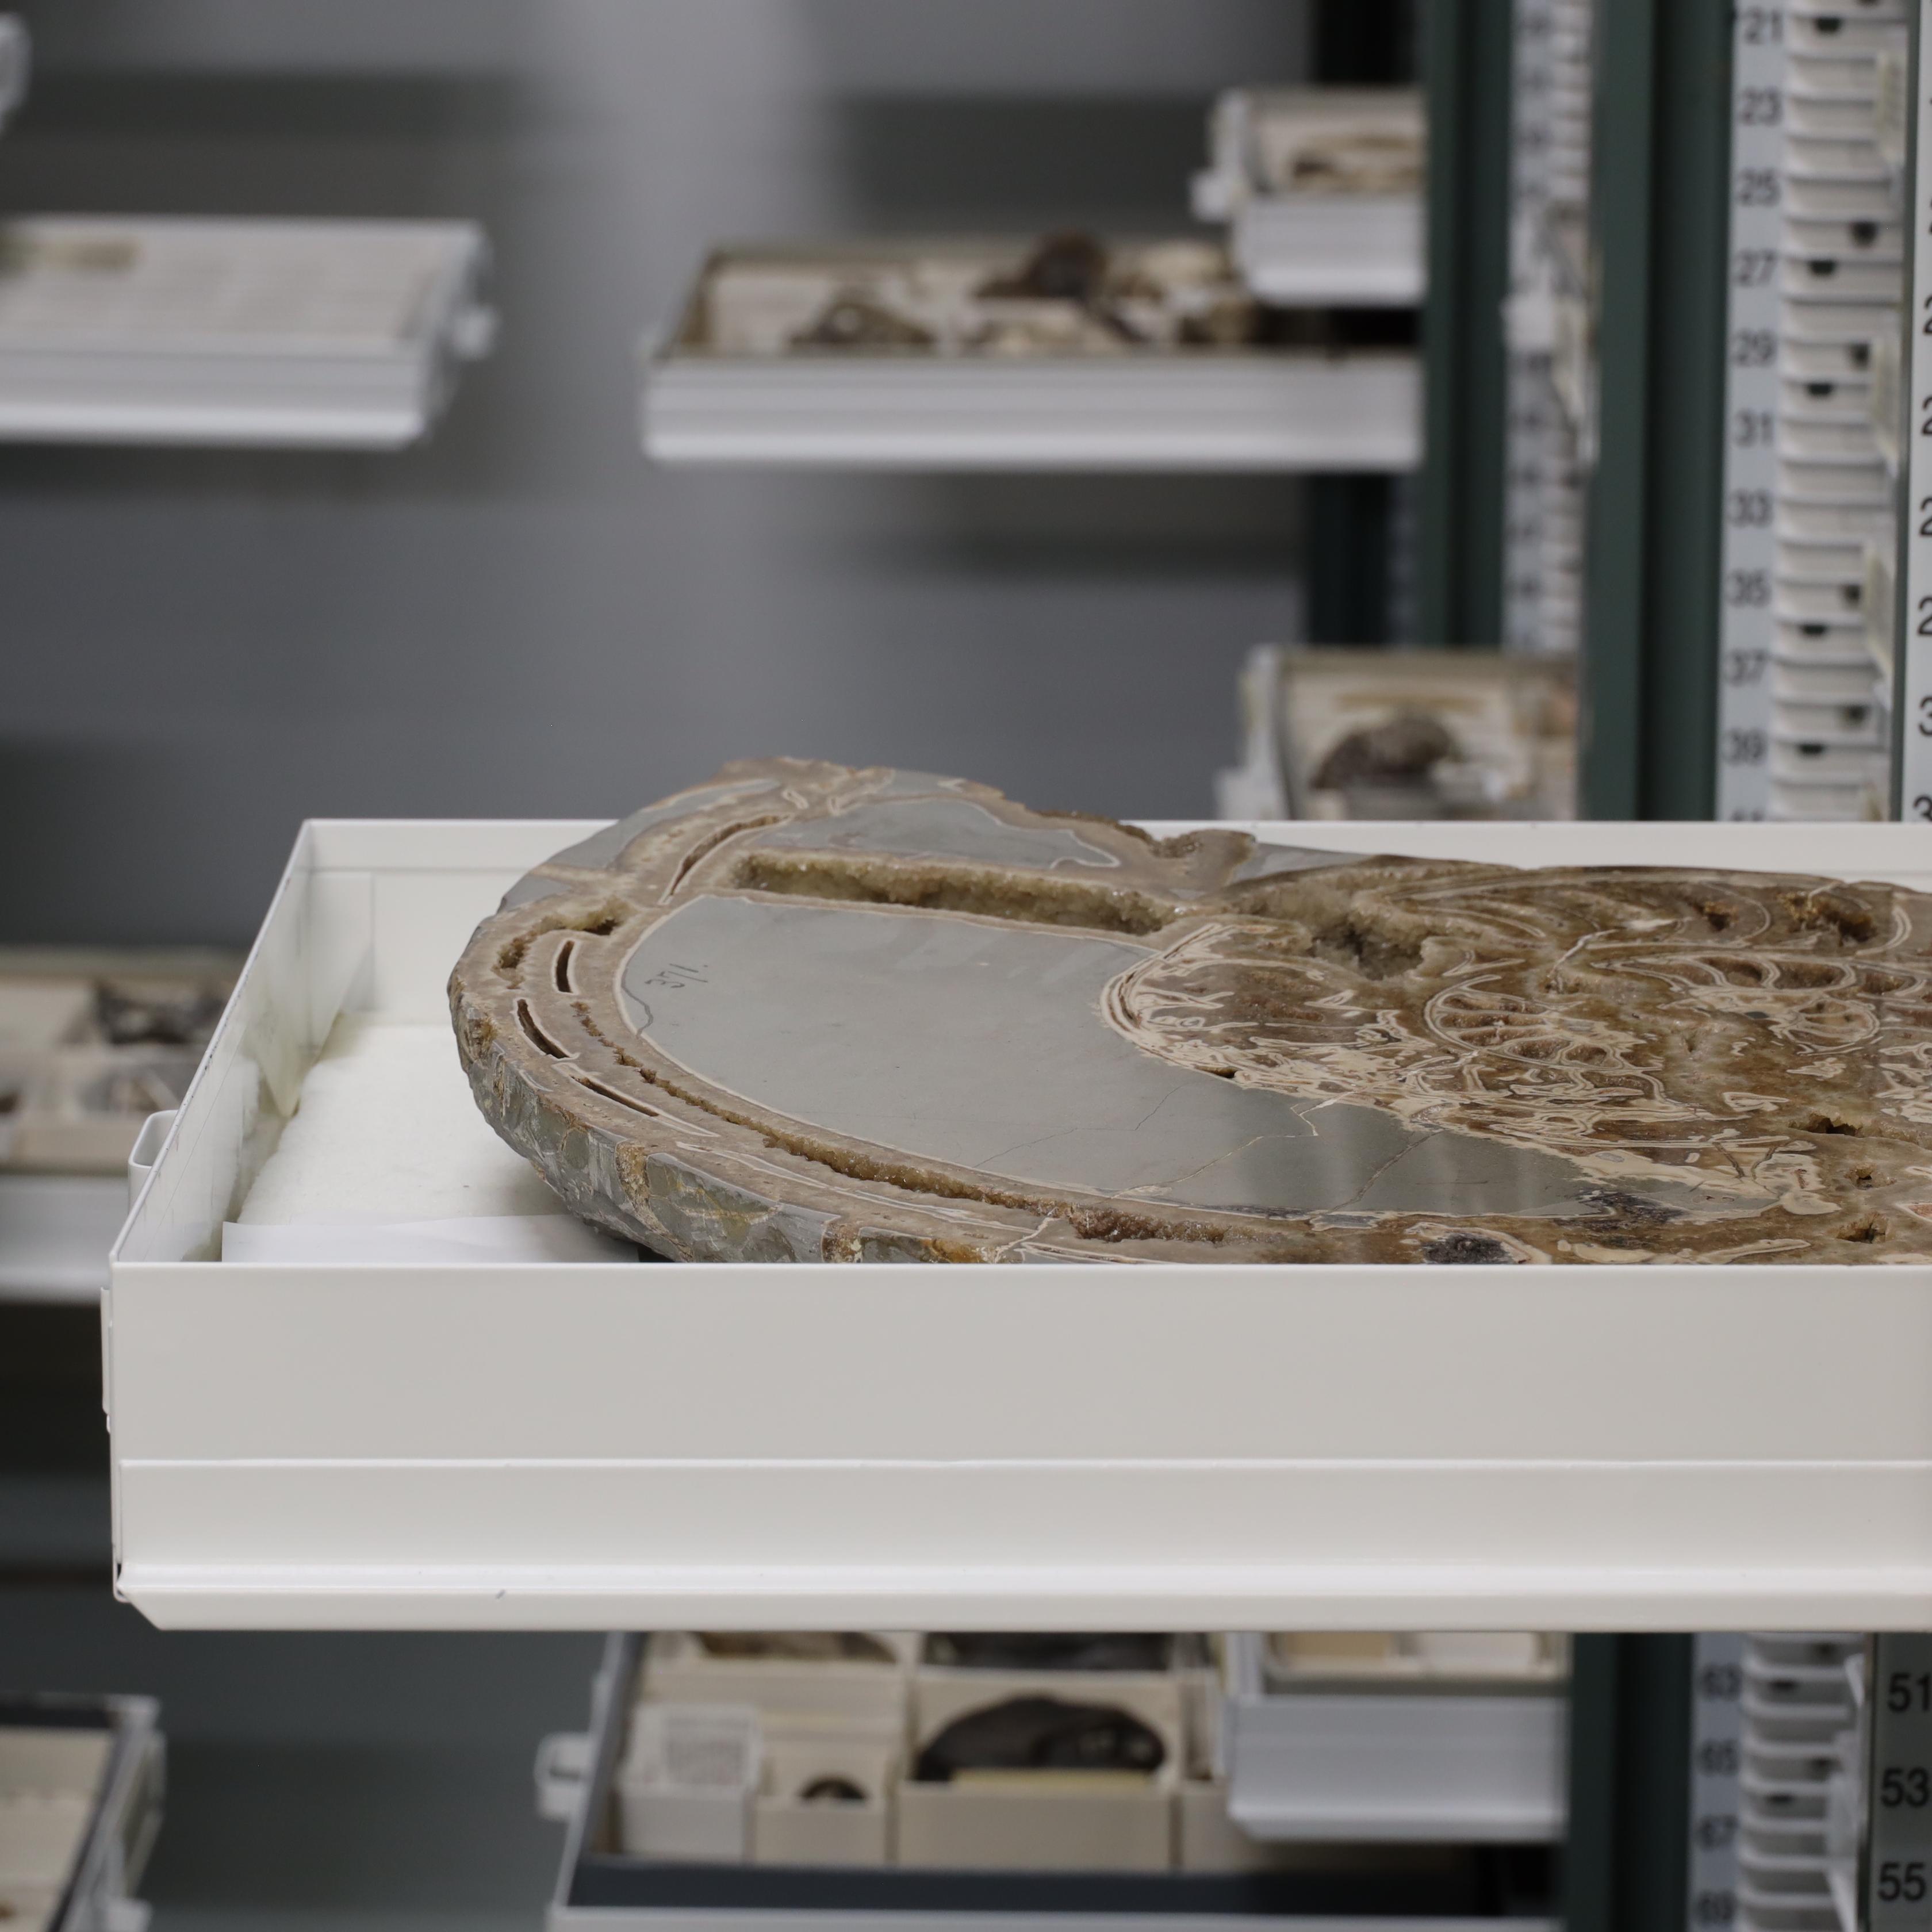 A white cabinet drawer holding a large ammonite fossil with several other open drawers visible in the background.